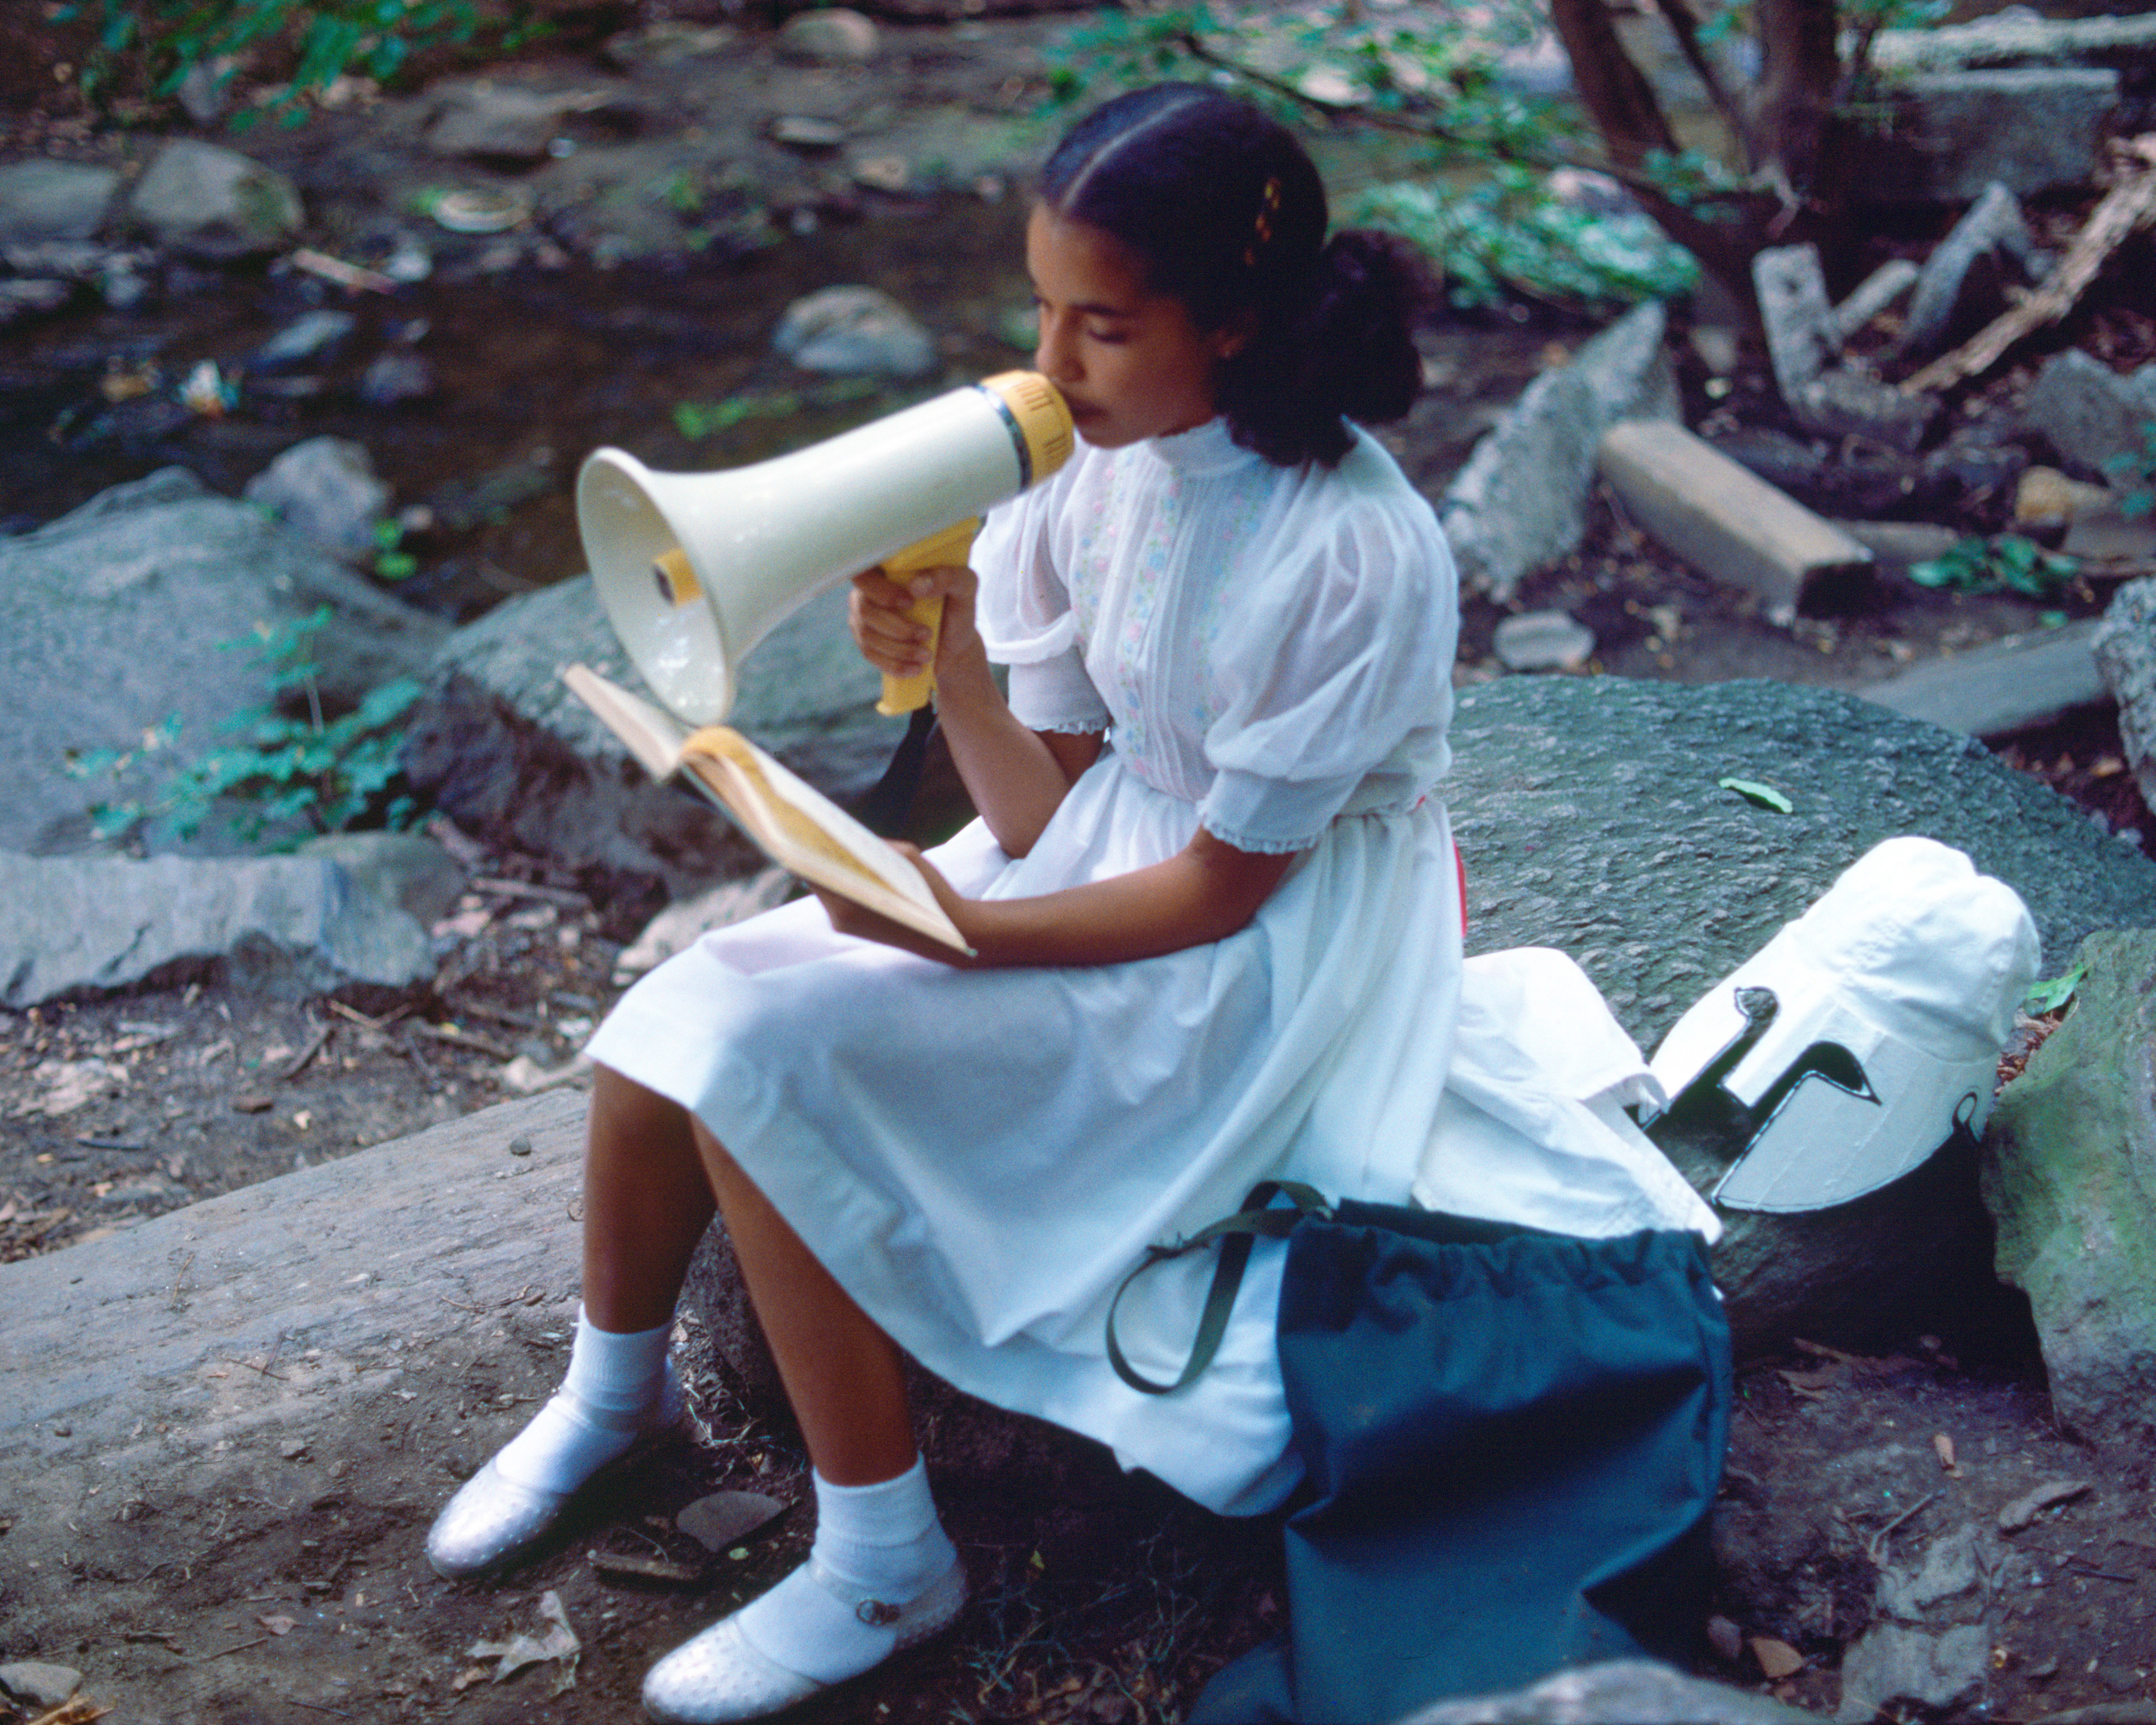 Rivers, First Draft: A Little Girl with Pink Sash memorizes her Latin lesson, 1982/2015, Digital C-print from Kodachrome 35mm slides in 48 parts, 16h x 20w in (40.64h x 50.80w cm)